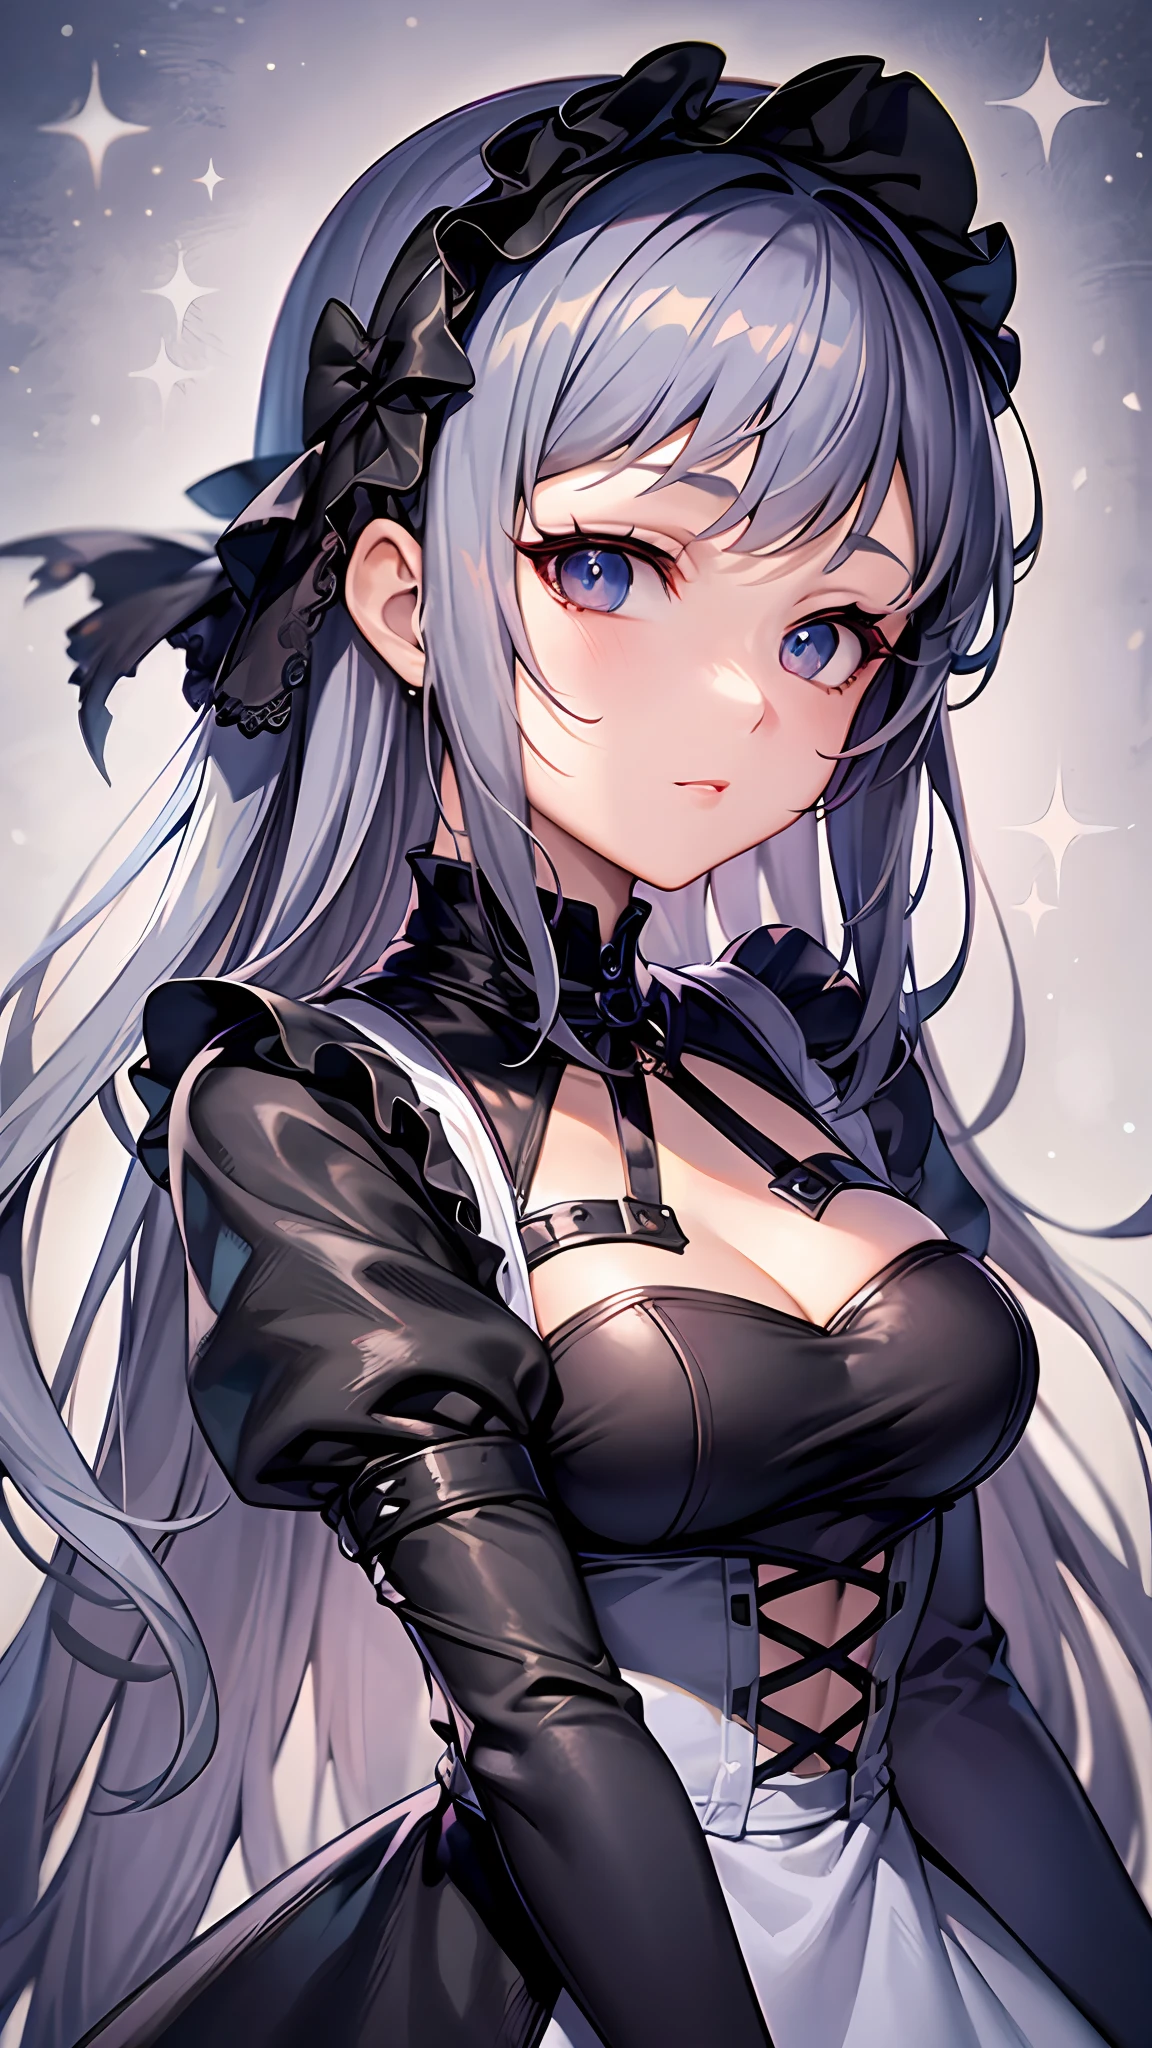 Close up portrait of woman in dress in white and black dress、Gothic Otome anime girl、anime girl wearing a black dress、Cute anime waifu in a nice dress、Anime girl in maid costume、Elegant Gothic princess、guweiz、Gwaits at Pixiv Art Station、Gwaitz at Art Station pixiv、Beautiful anime girl、Light smile